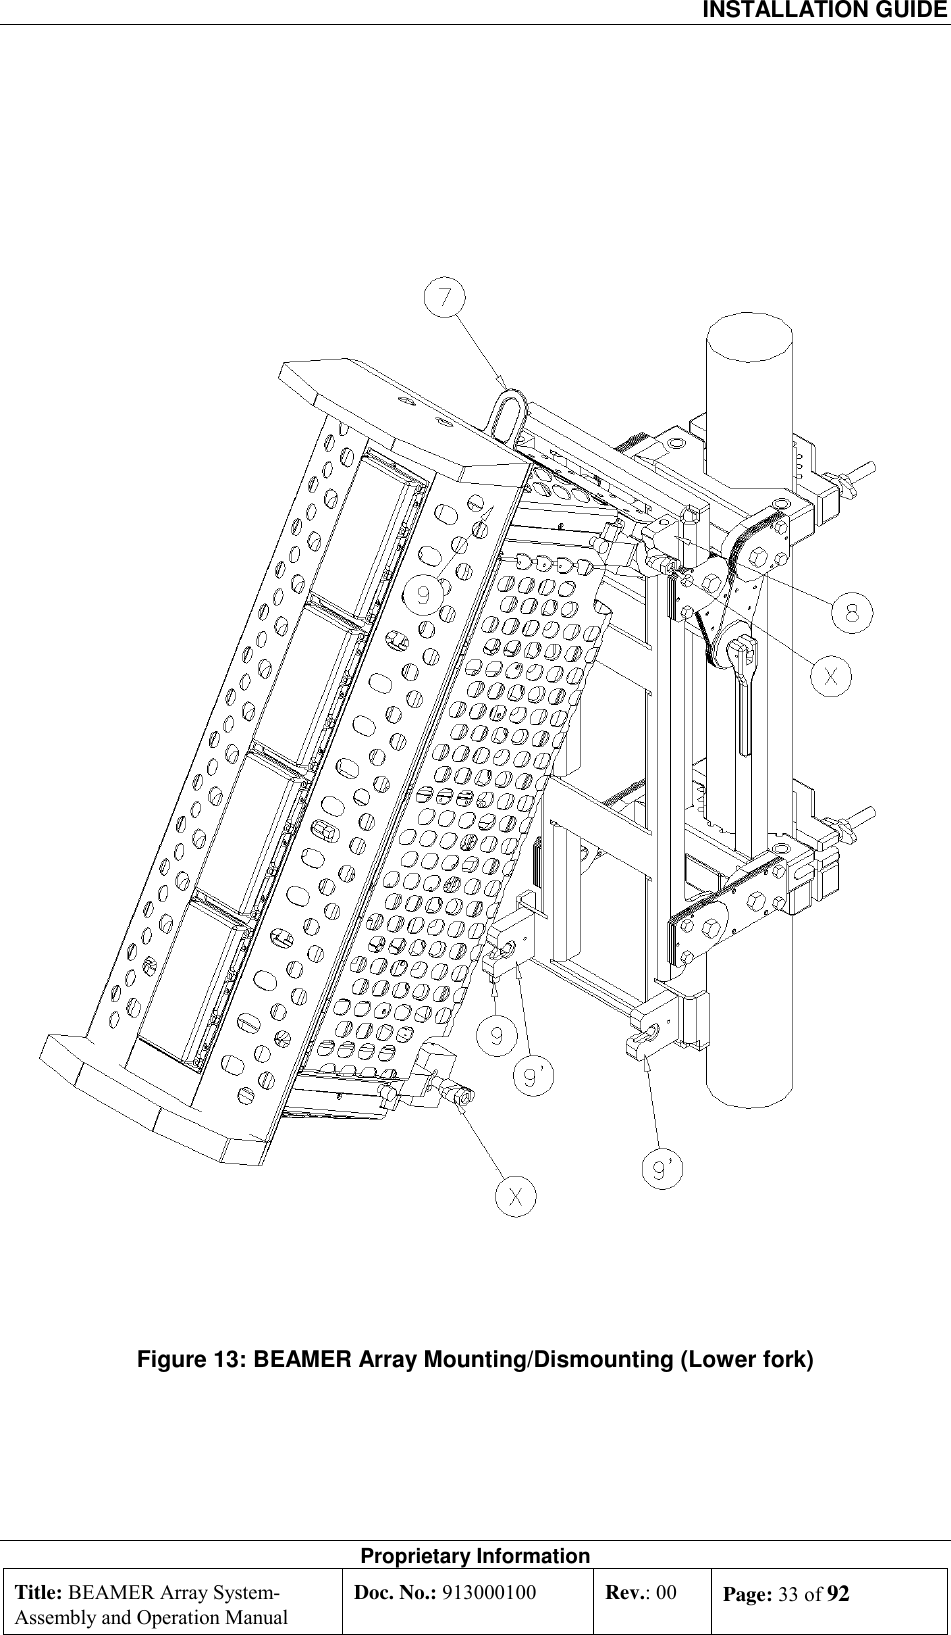  INSTALLATION GUIDE Proprietary Information Title: BEAMER Array System- Assembly and Operation Manual Doc. No.: 913000100  Rev.: 00  Page: 33 of 92     Figure 13: BEAMER Array Mounting/Dismounting (Lower fork)